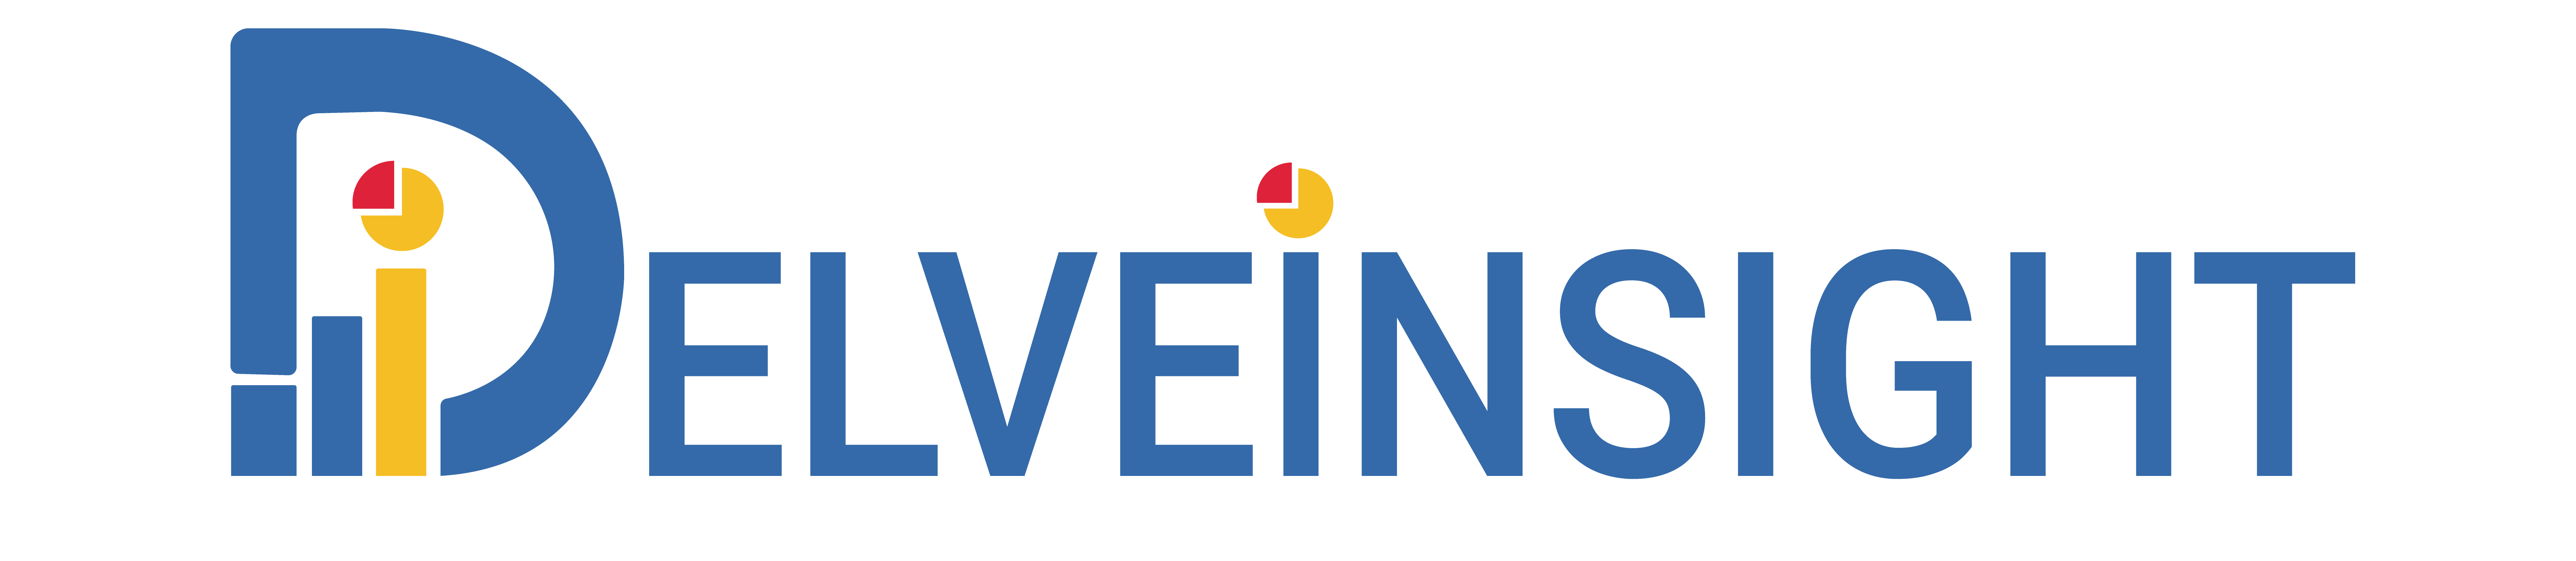 Venous Thromboembolism Pipeline Review - Novel and Emerging Therapeutic Drugs, Clinical Trials, and Treatment Outlook | Key Companies - Ionis, Bayer, Janssen, Quercis, Ono Pharma, Verseon, and Bayer